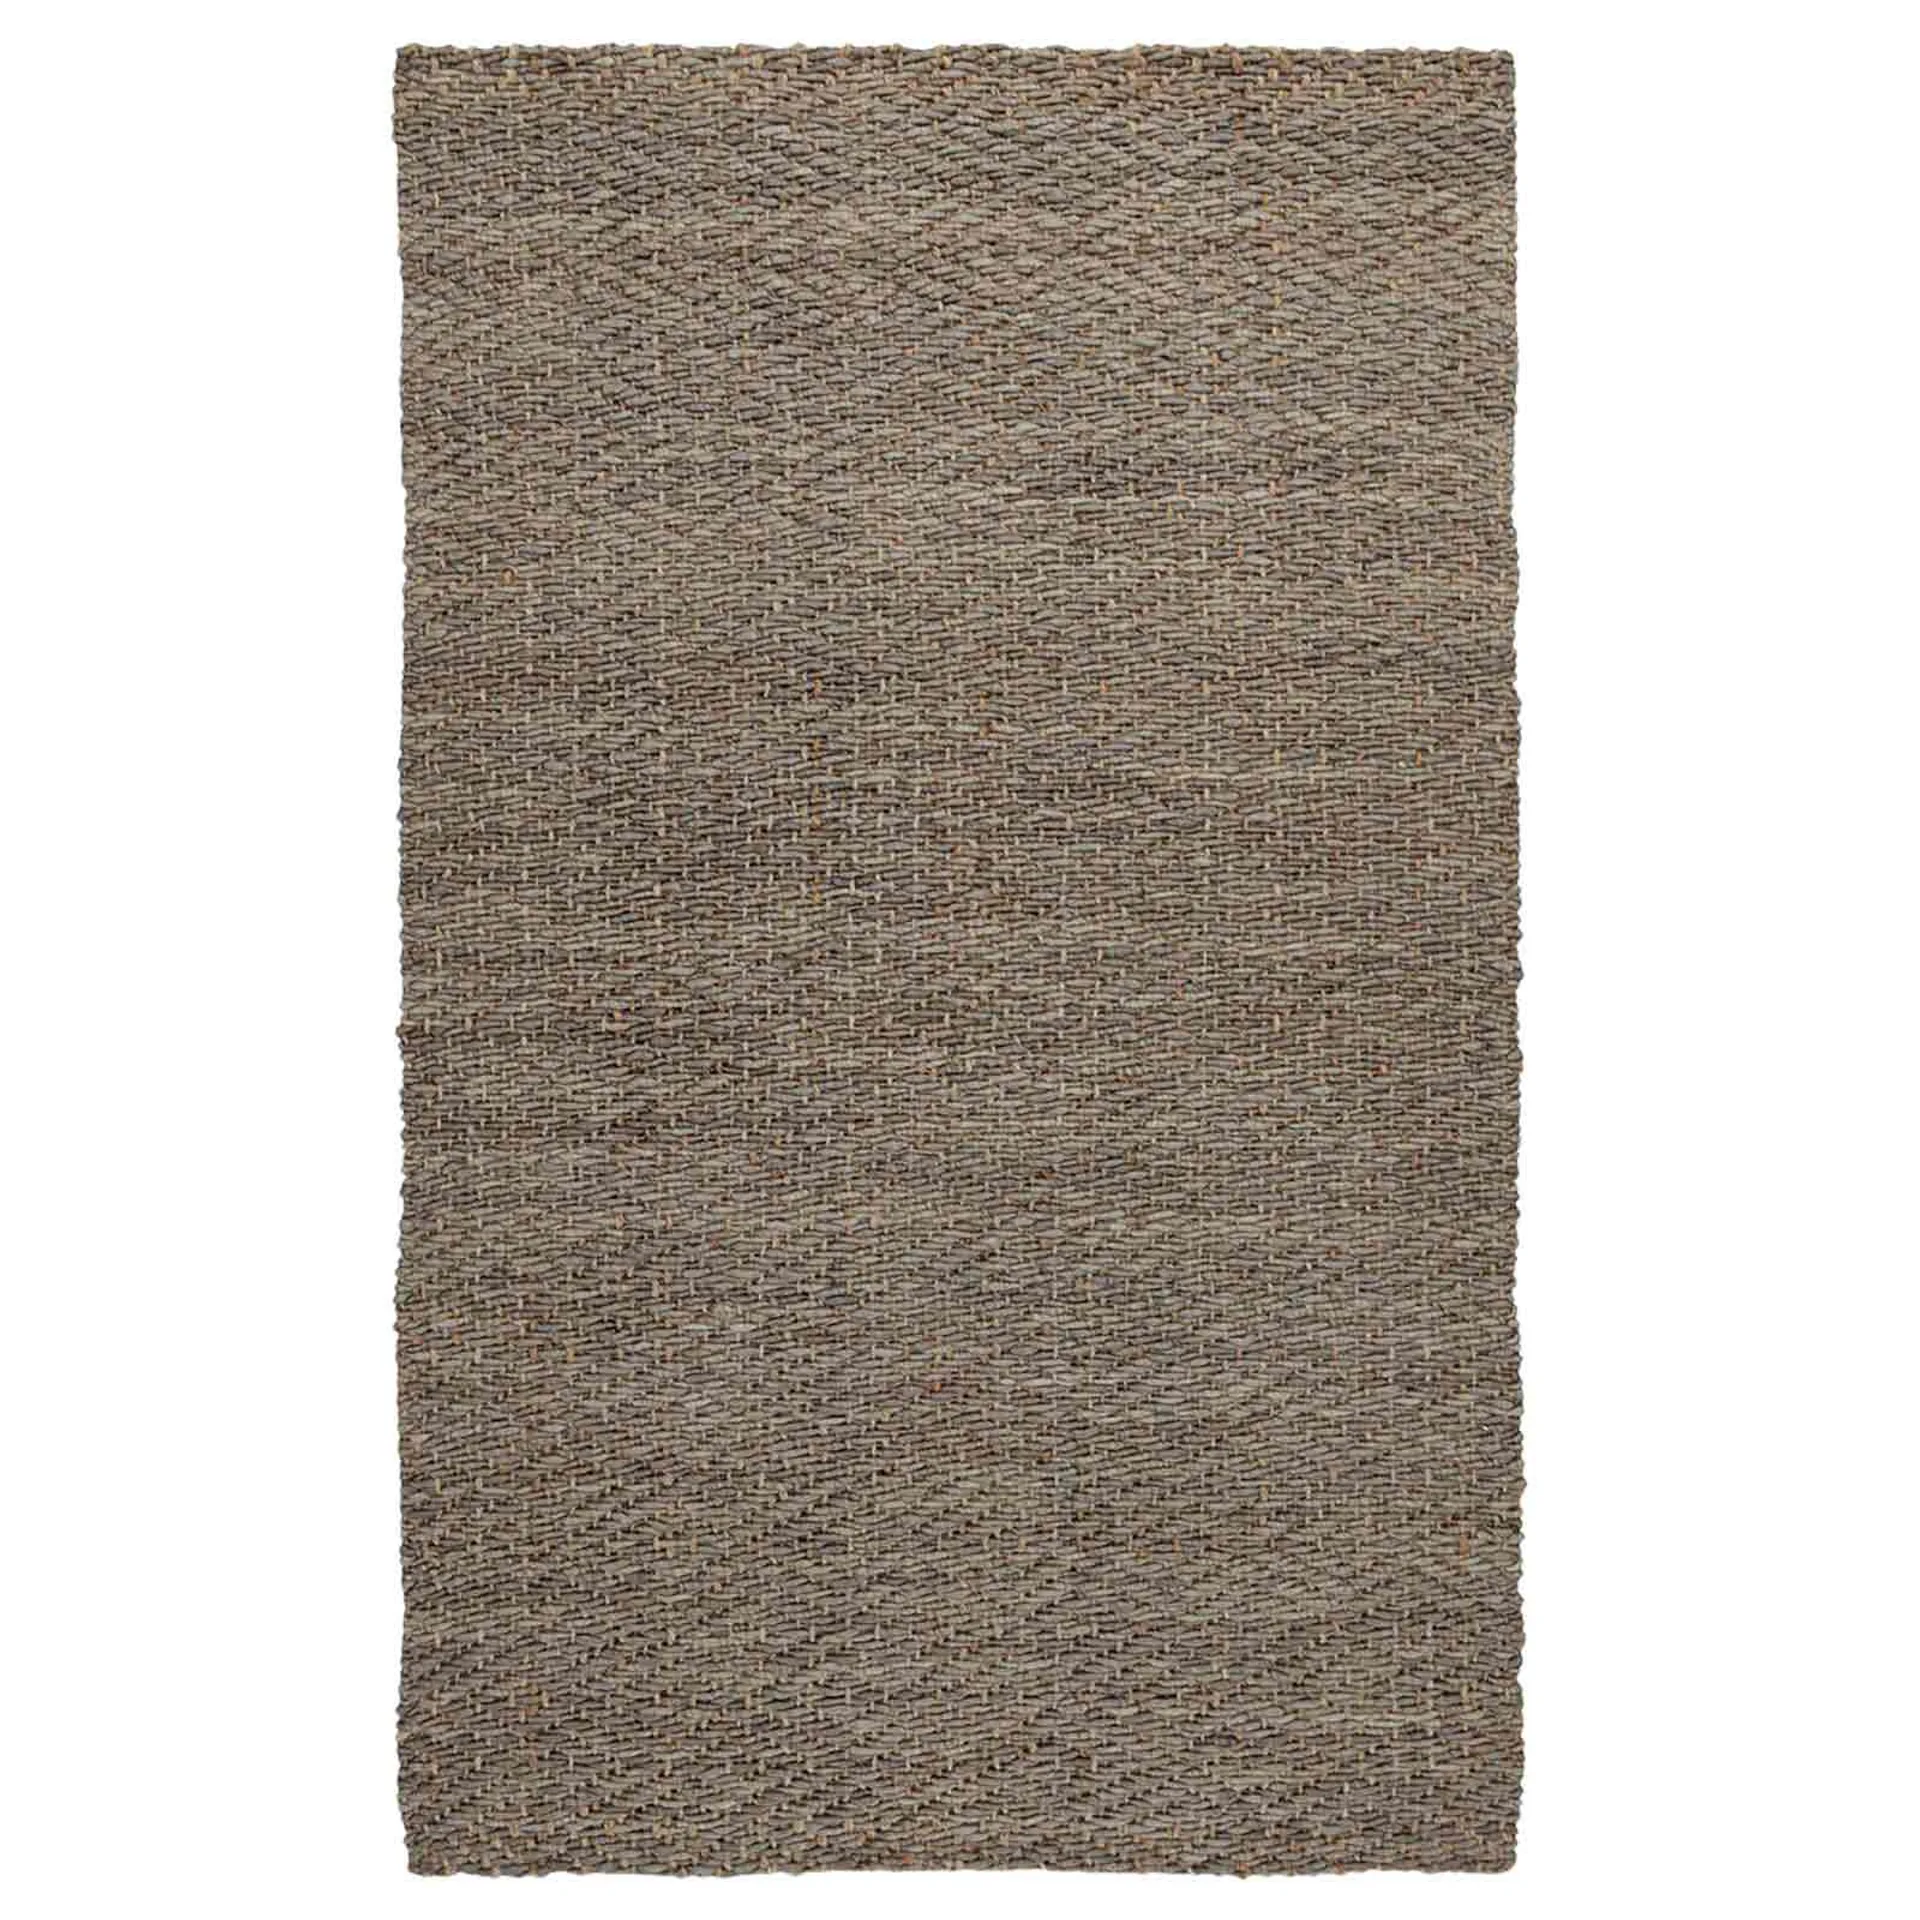 Villa by Classic Home Coil Jute Natural Rug 5x8